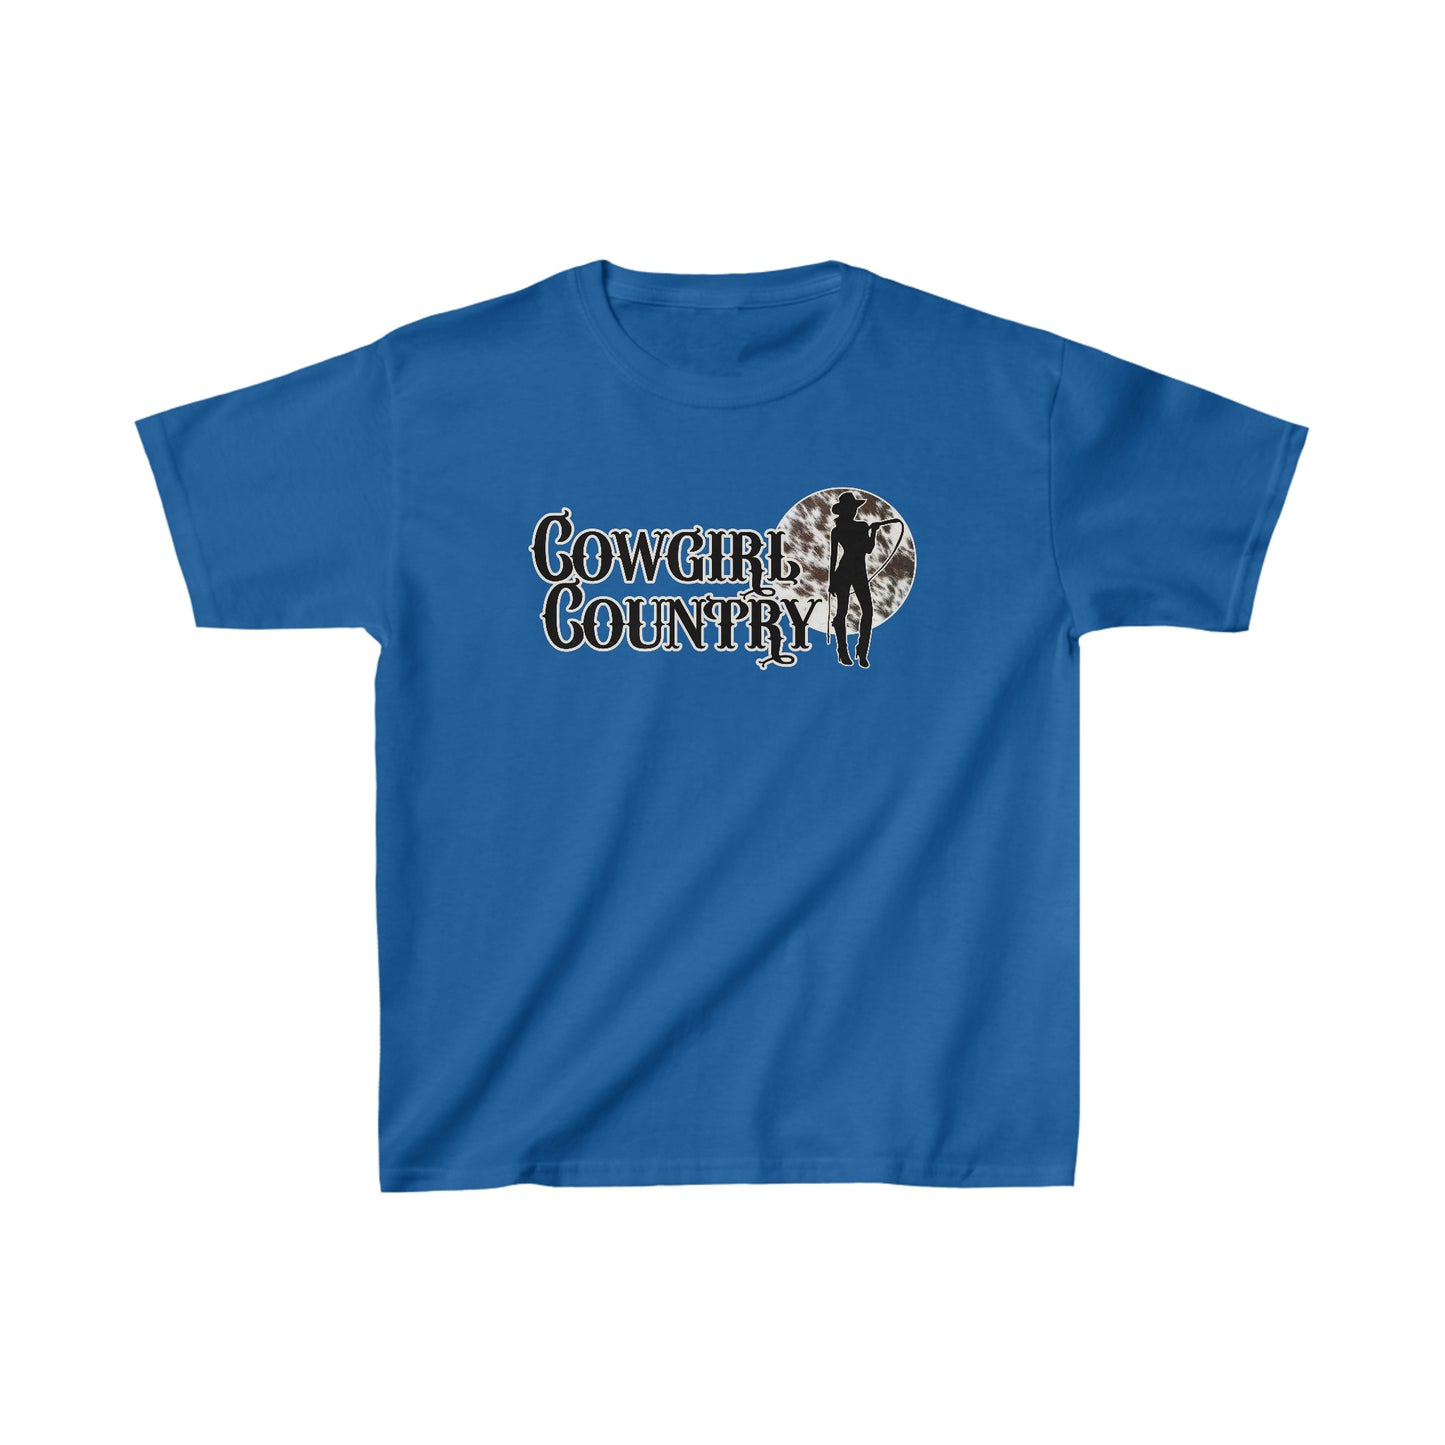 Cowgirl Country Kids Tee